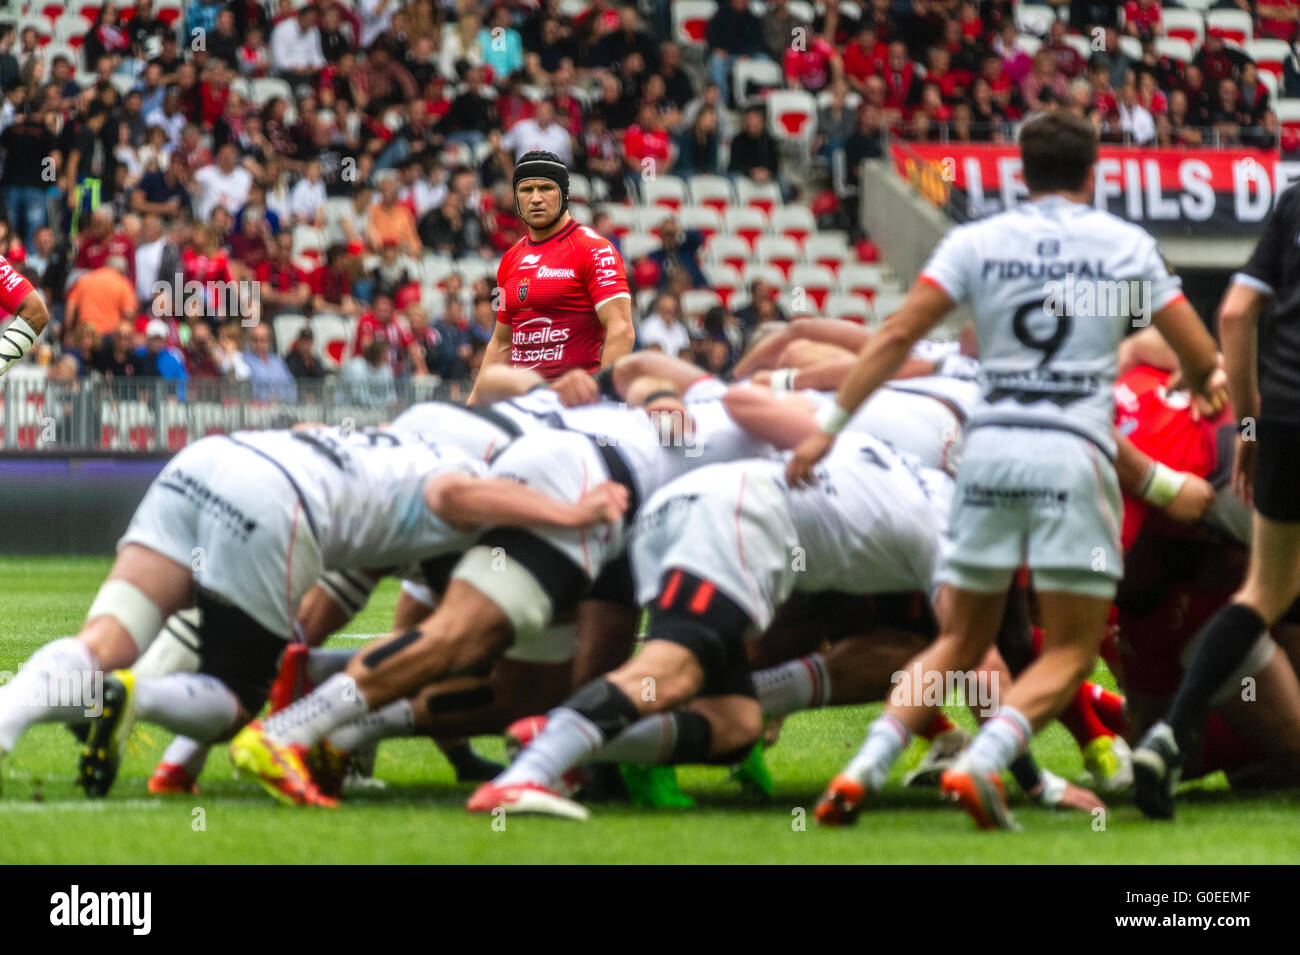 MATT GITEAU. Rugby Union. French Top 14. Match between RC Toulon and Stade  Toulousain ( Toulouse ) at Allianz Riviera on April 30, 2016 in Nice,  France. Score 10 - 12 Giteau.